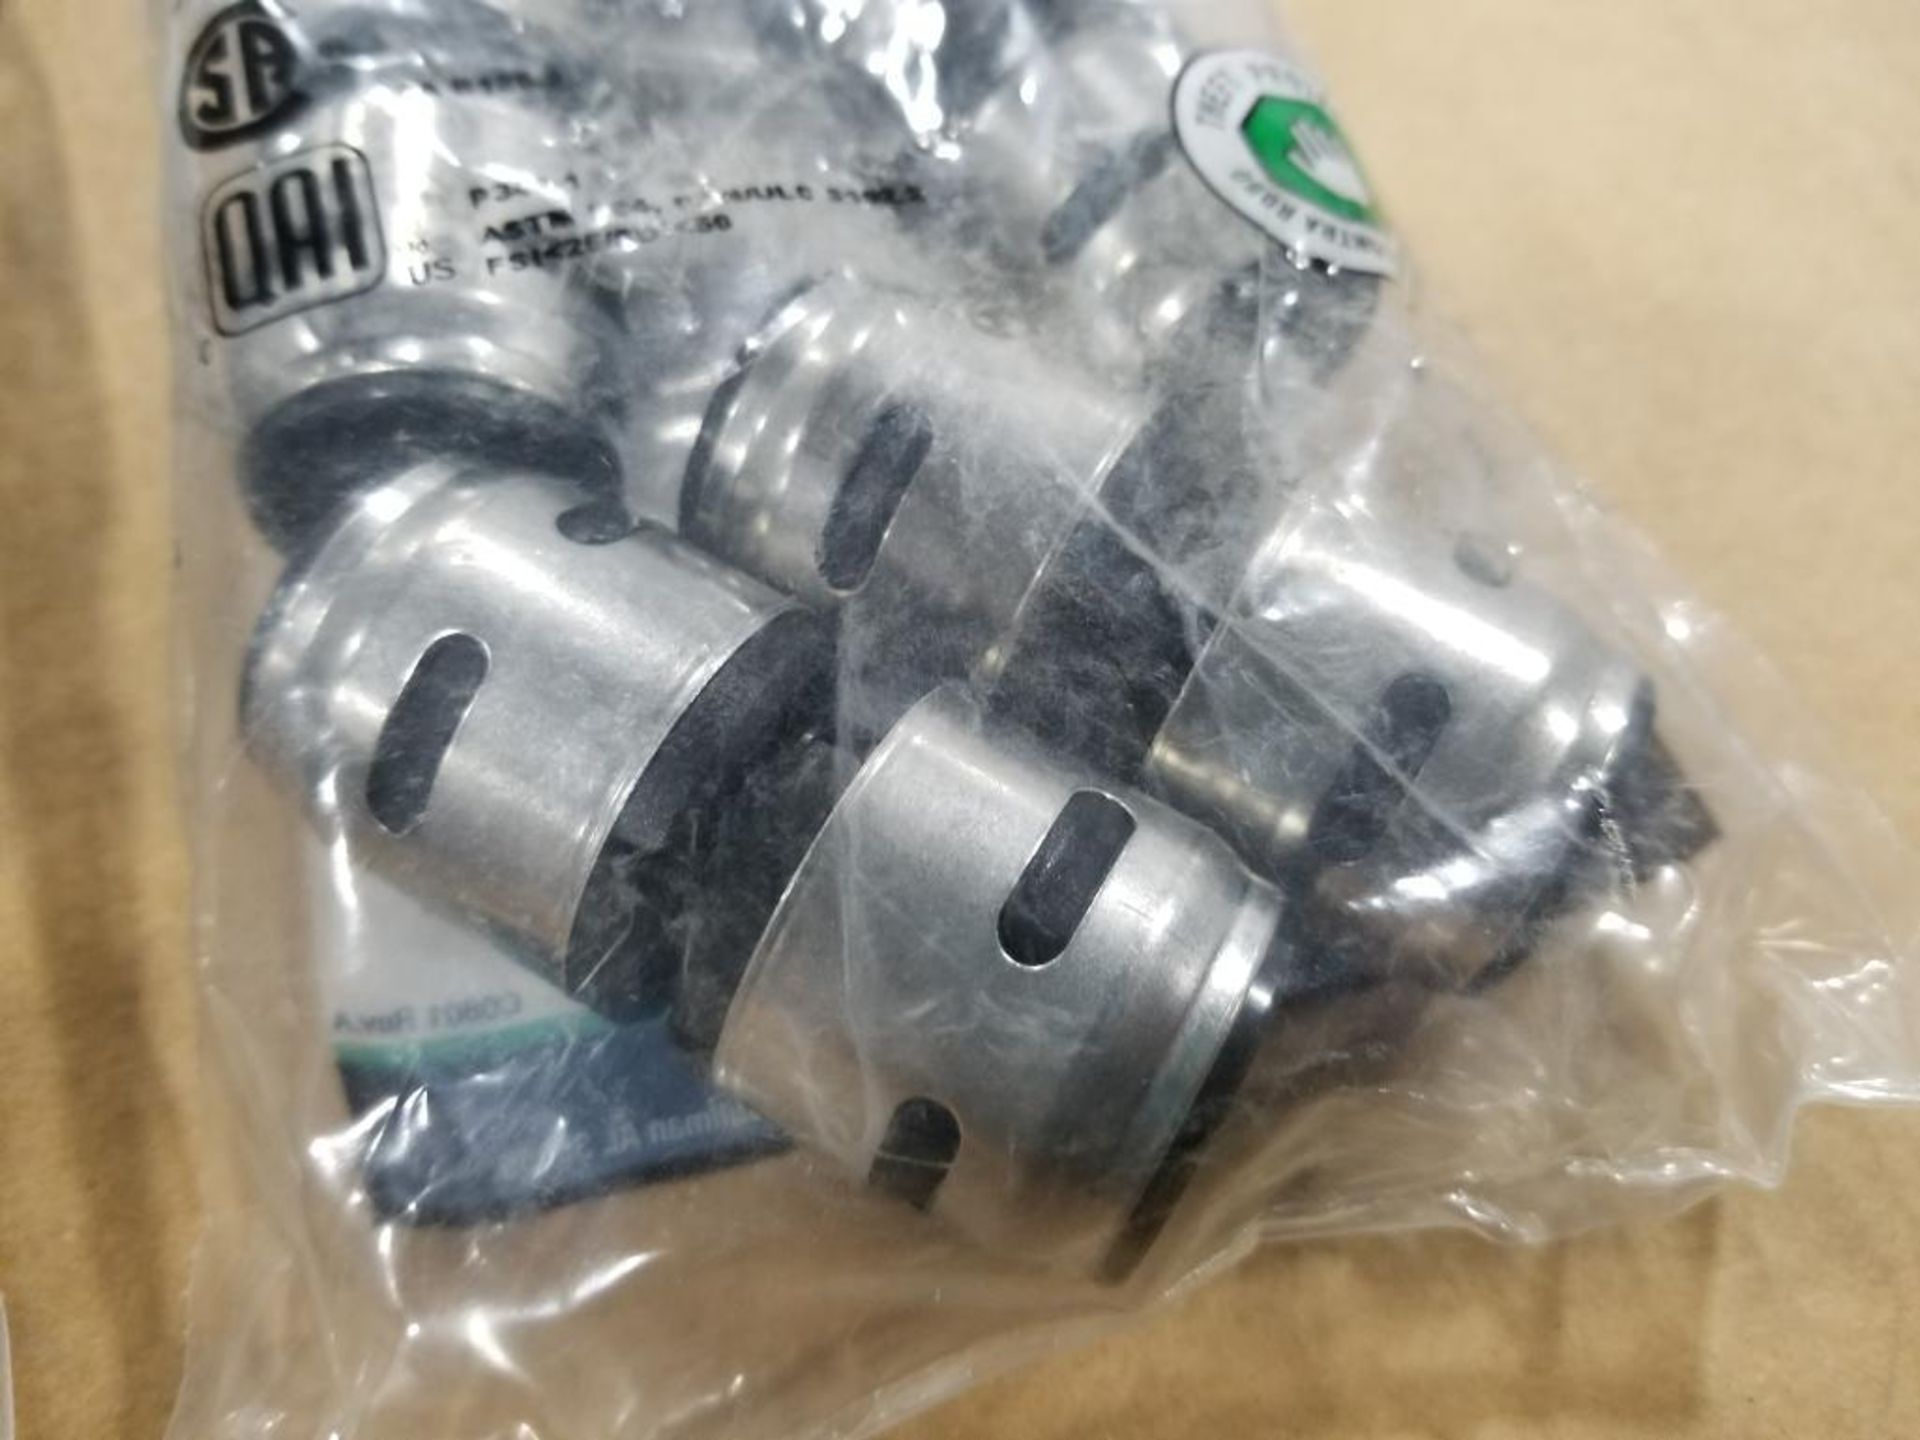 Qty 72 - SharkBite EvoPex fittings. 12 bags of 6. - Image 3 of 4